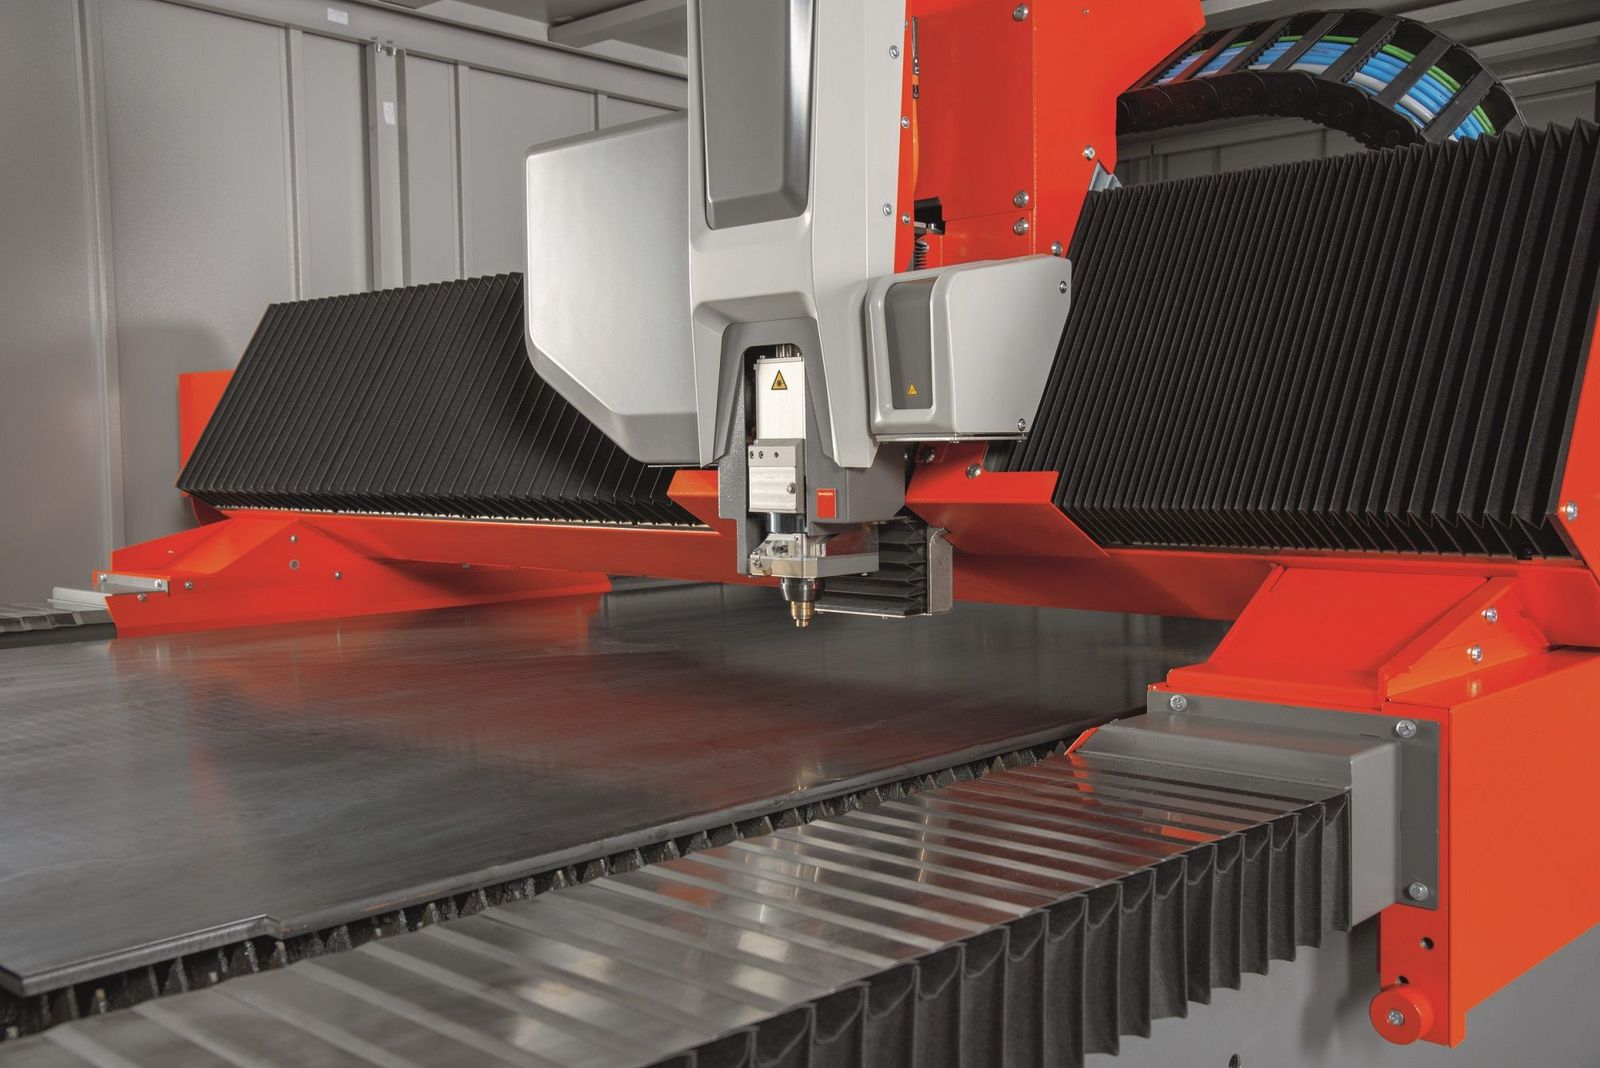 Automation arrives at sheet metal firm